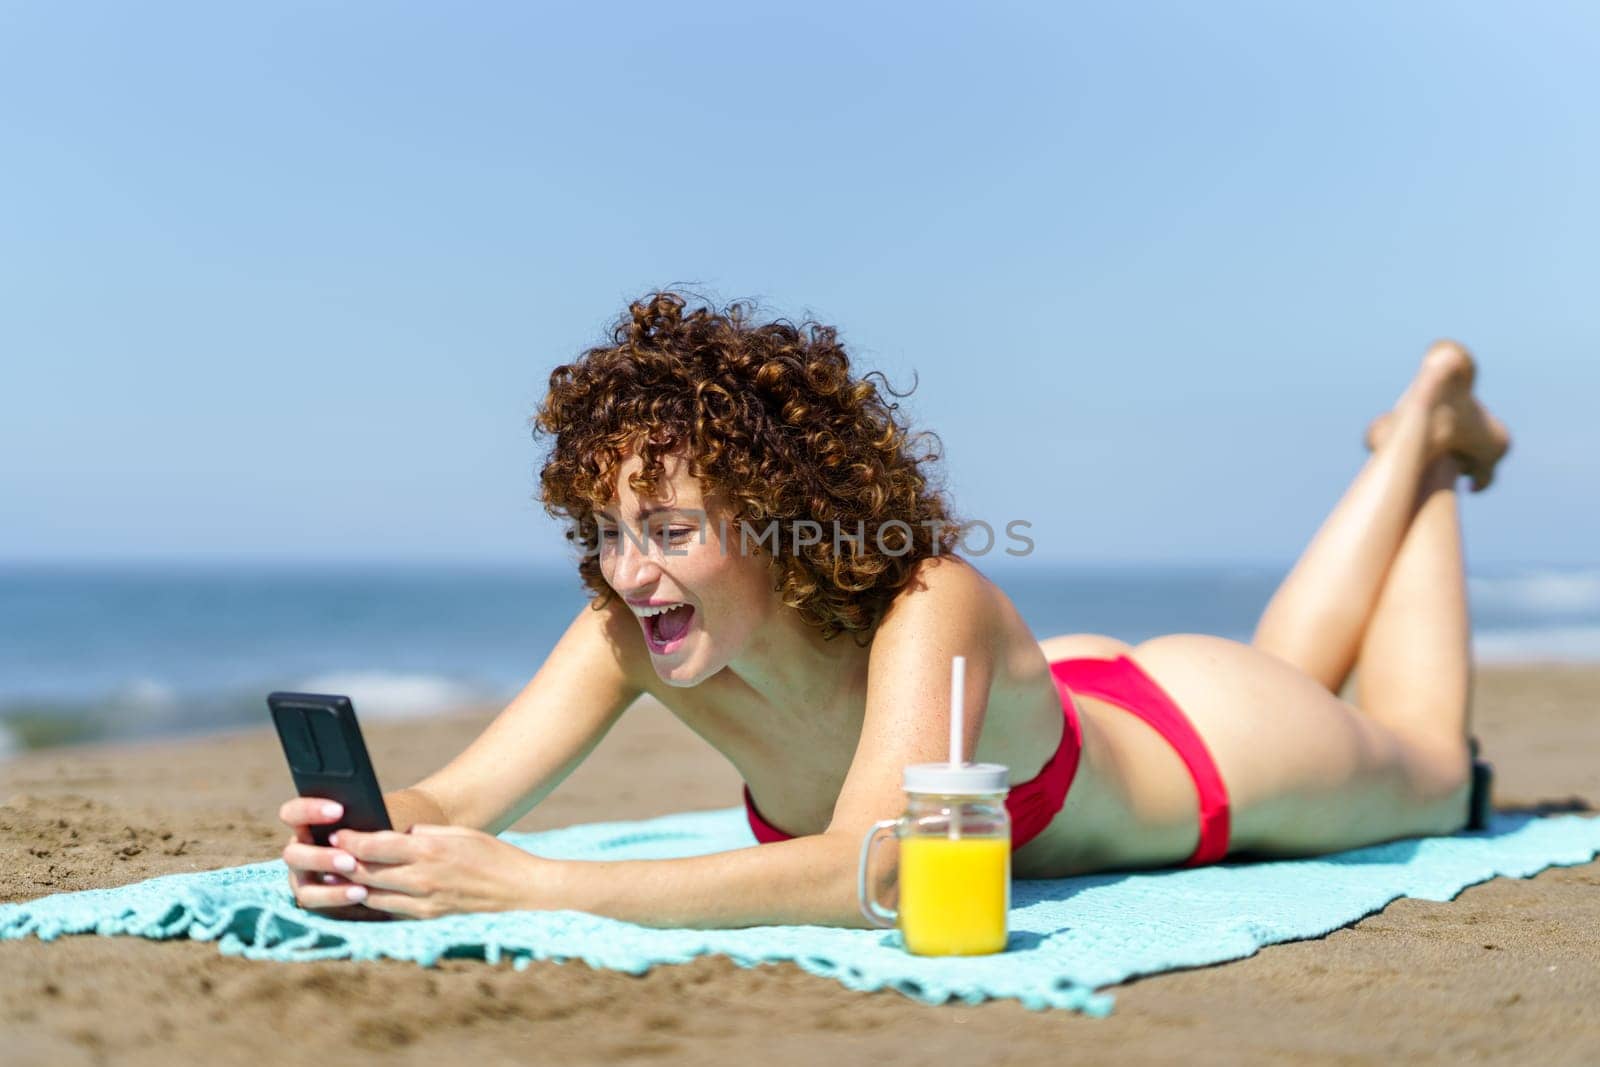 Laughing young curly haired lady in bikini having cup of cool drink while surfing smartphone and resting on sandy beach